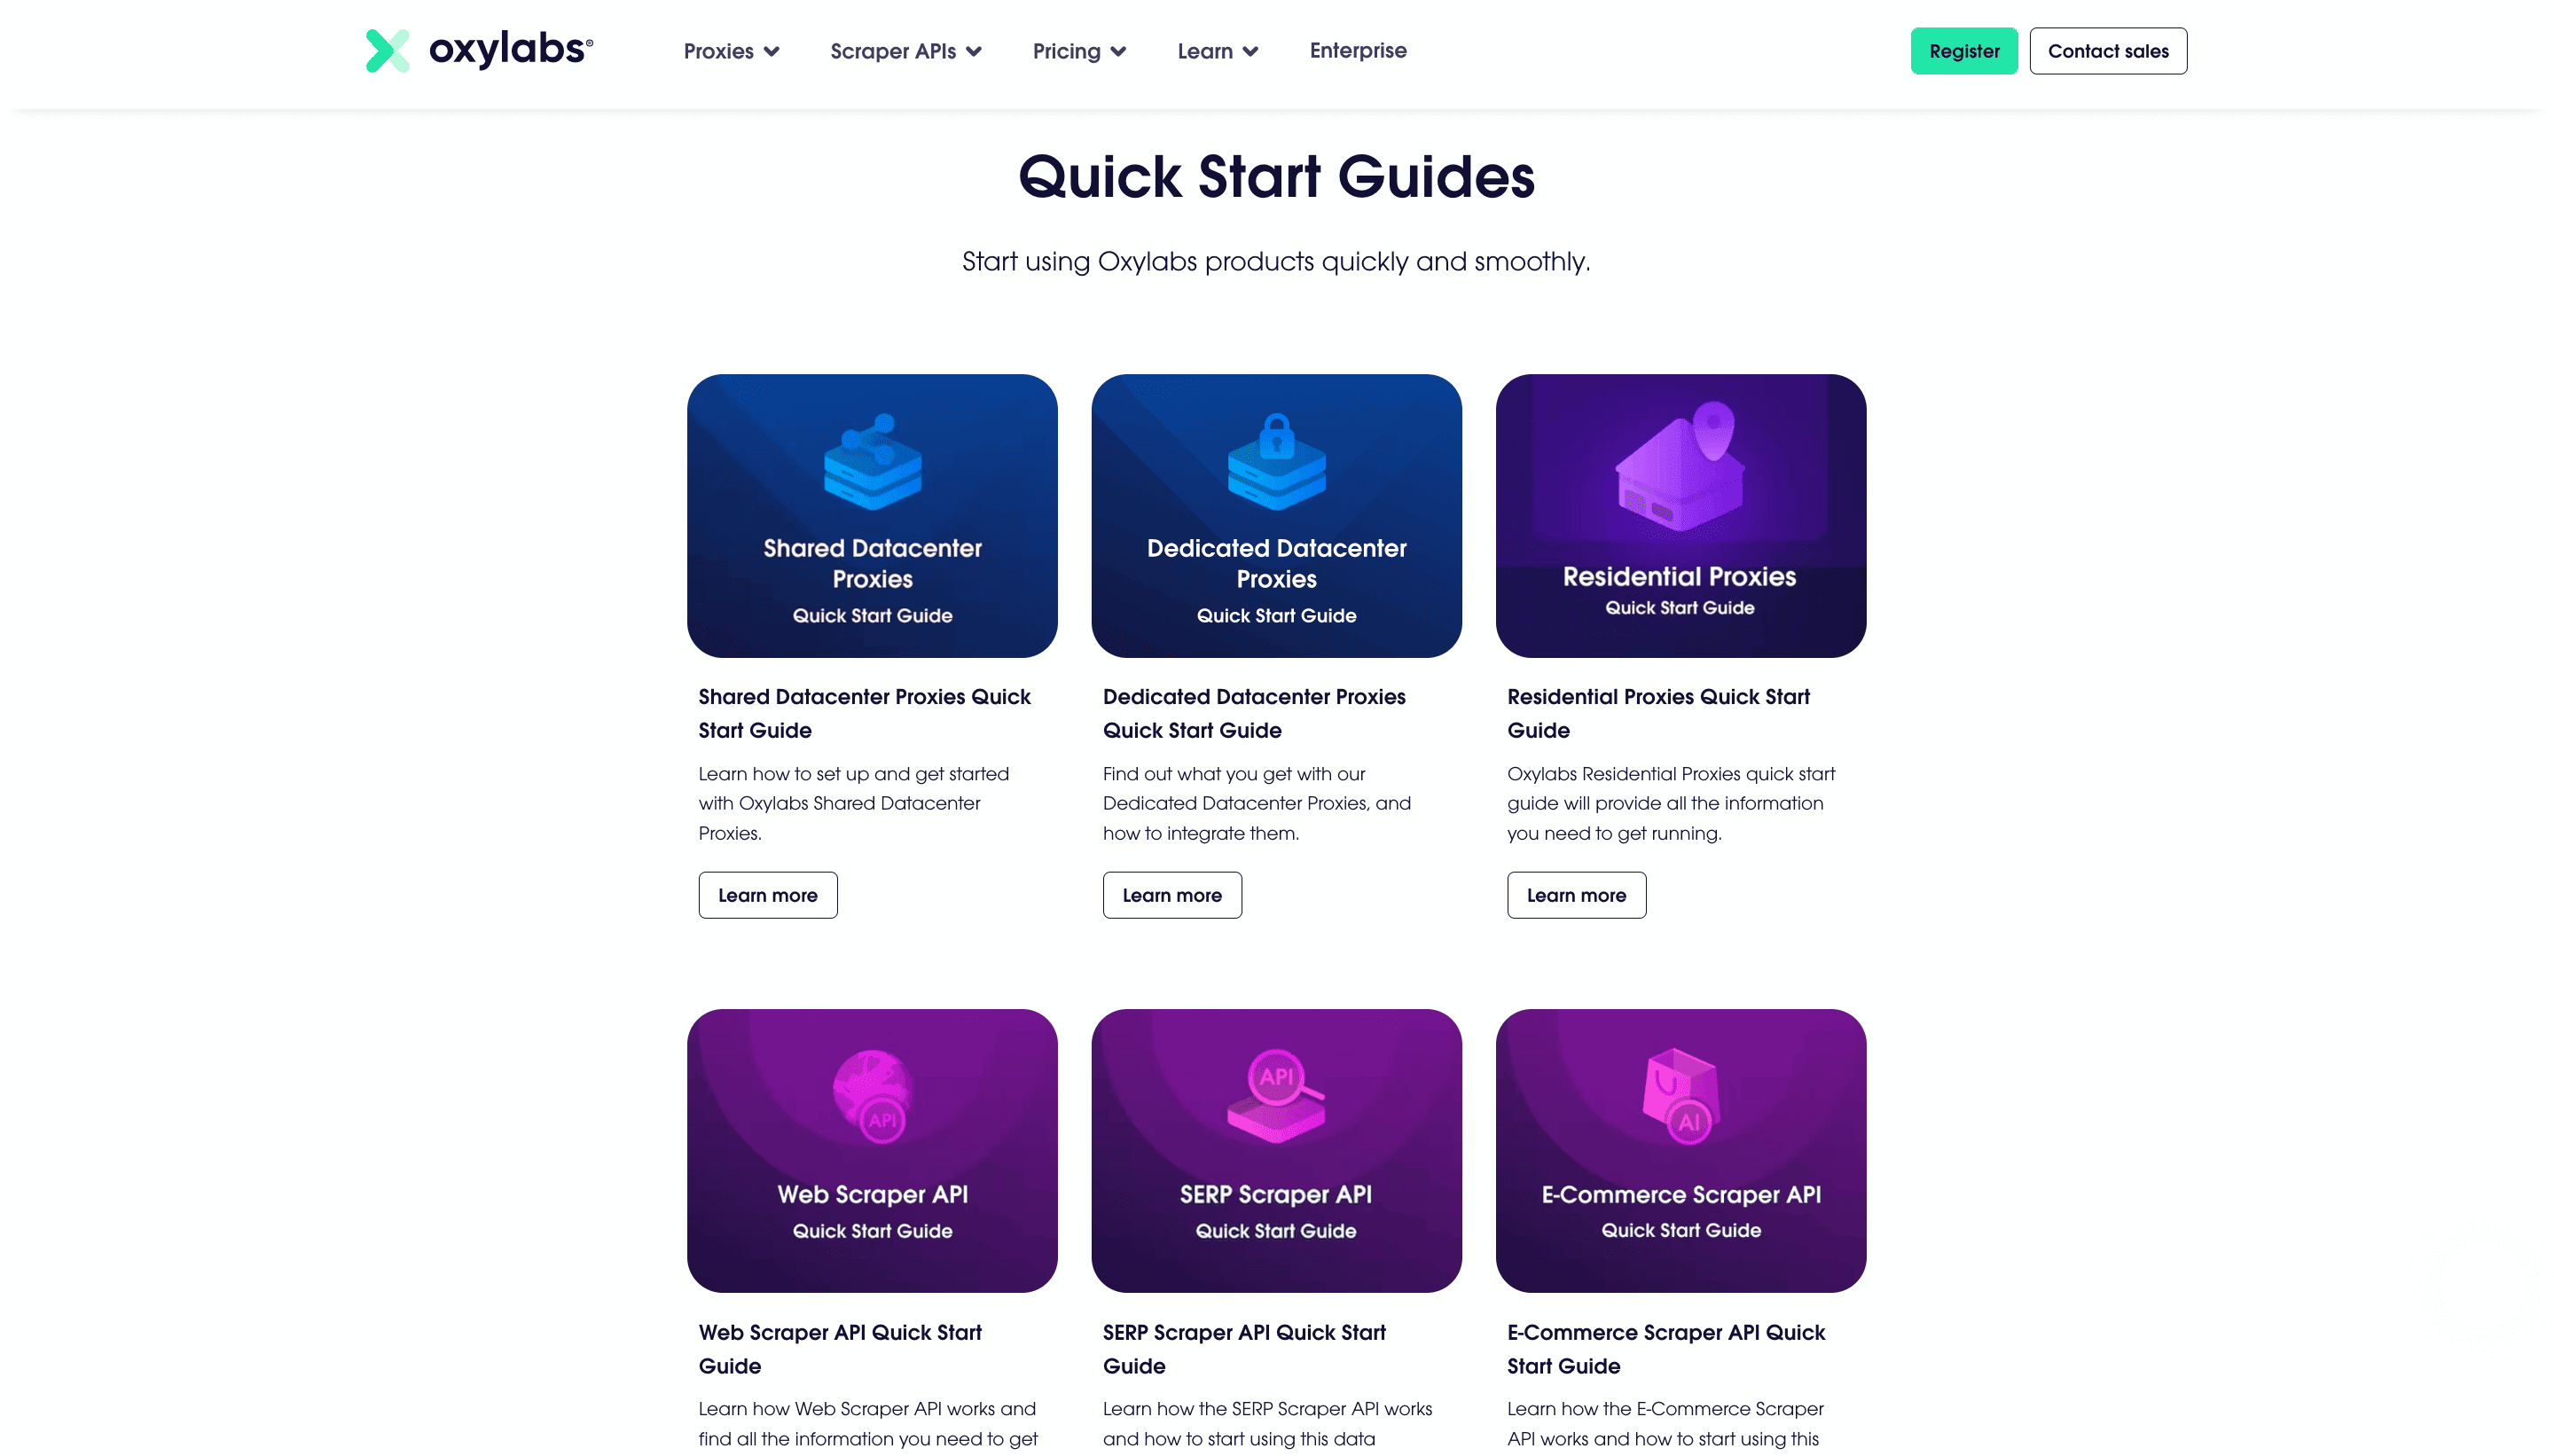 oxylabs quick start guides